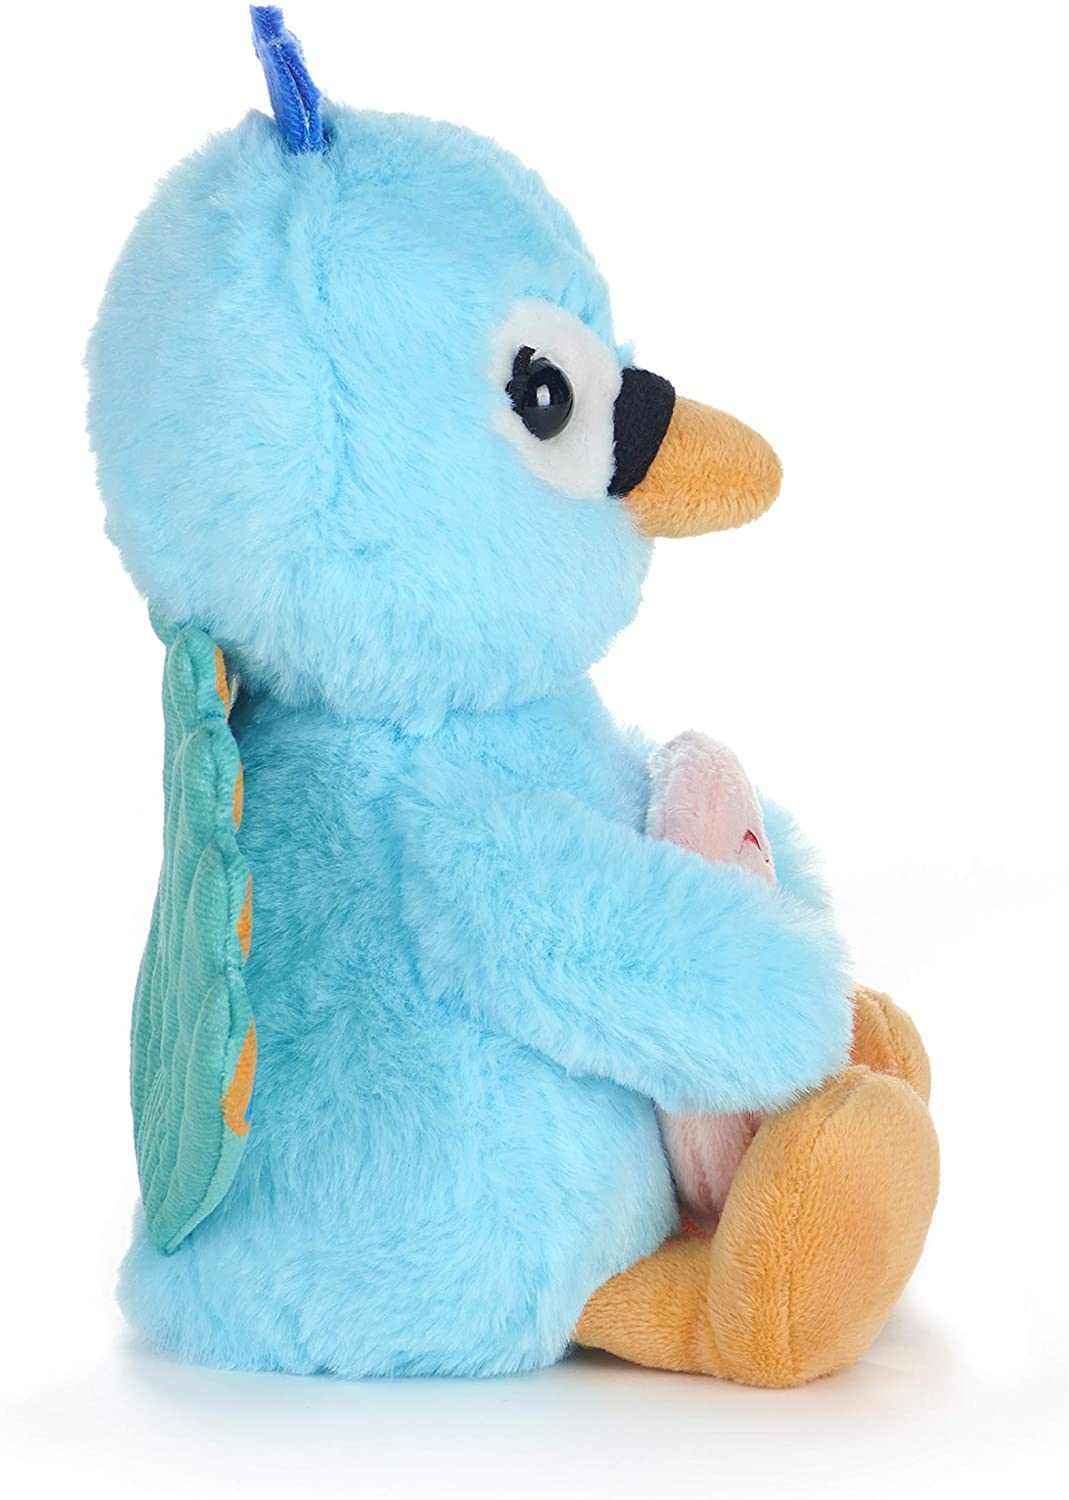 Posh Paws 37332 Swizzels Love Hearts 18cm (7”) Peacock Truly Fabulous Message Soft Toy